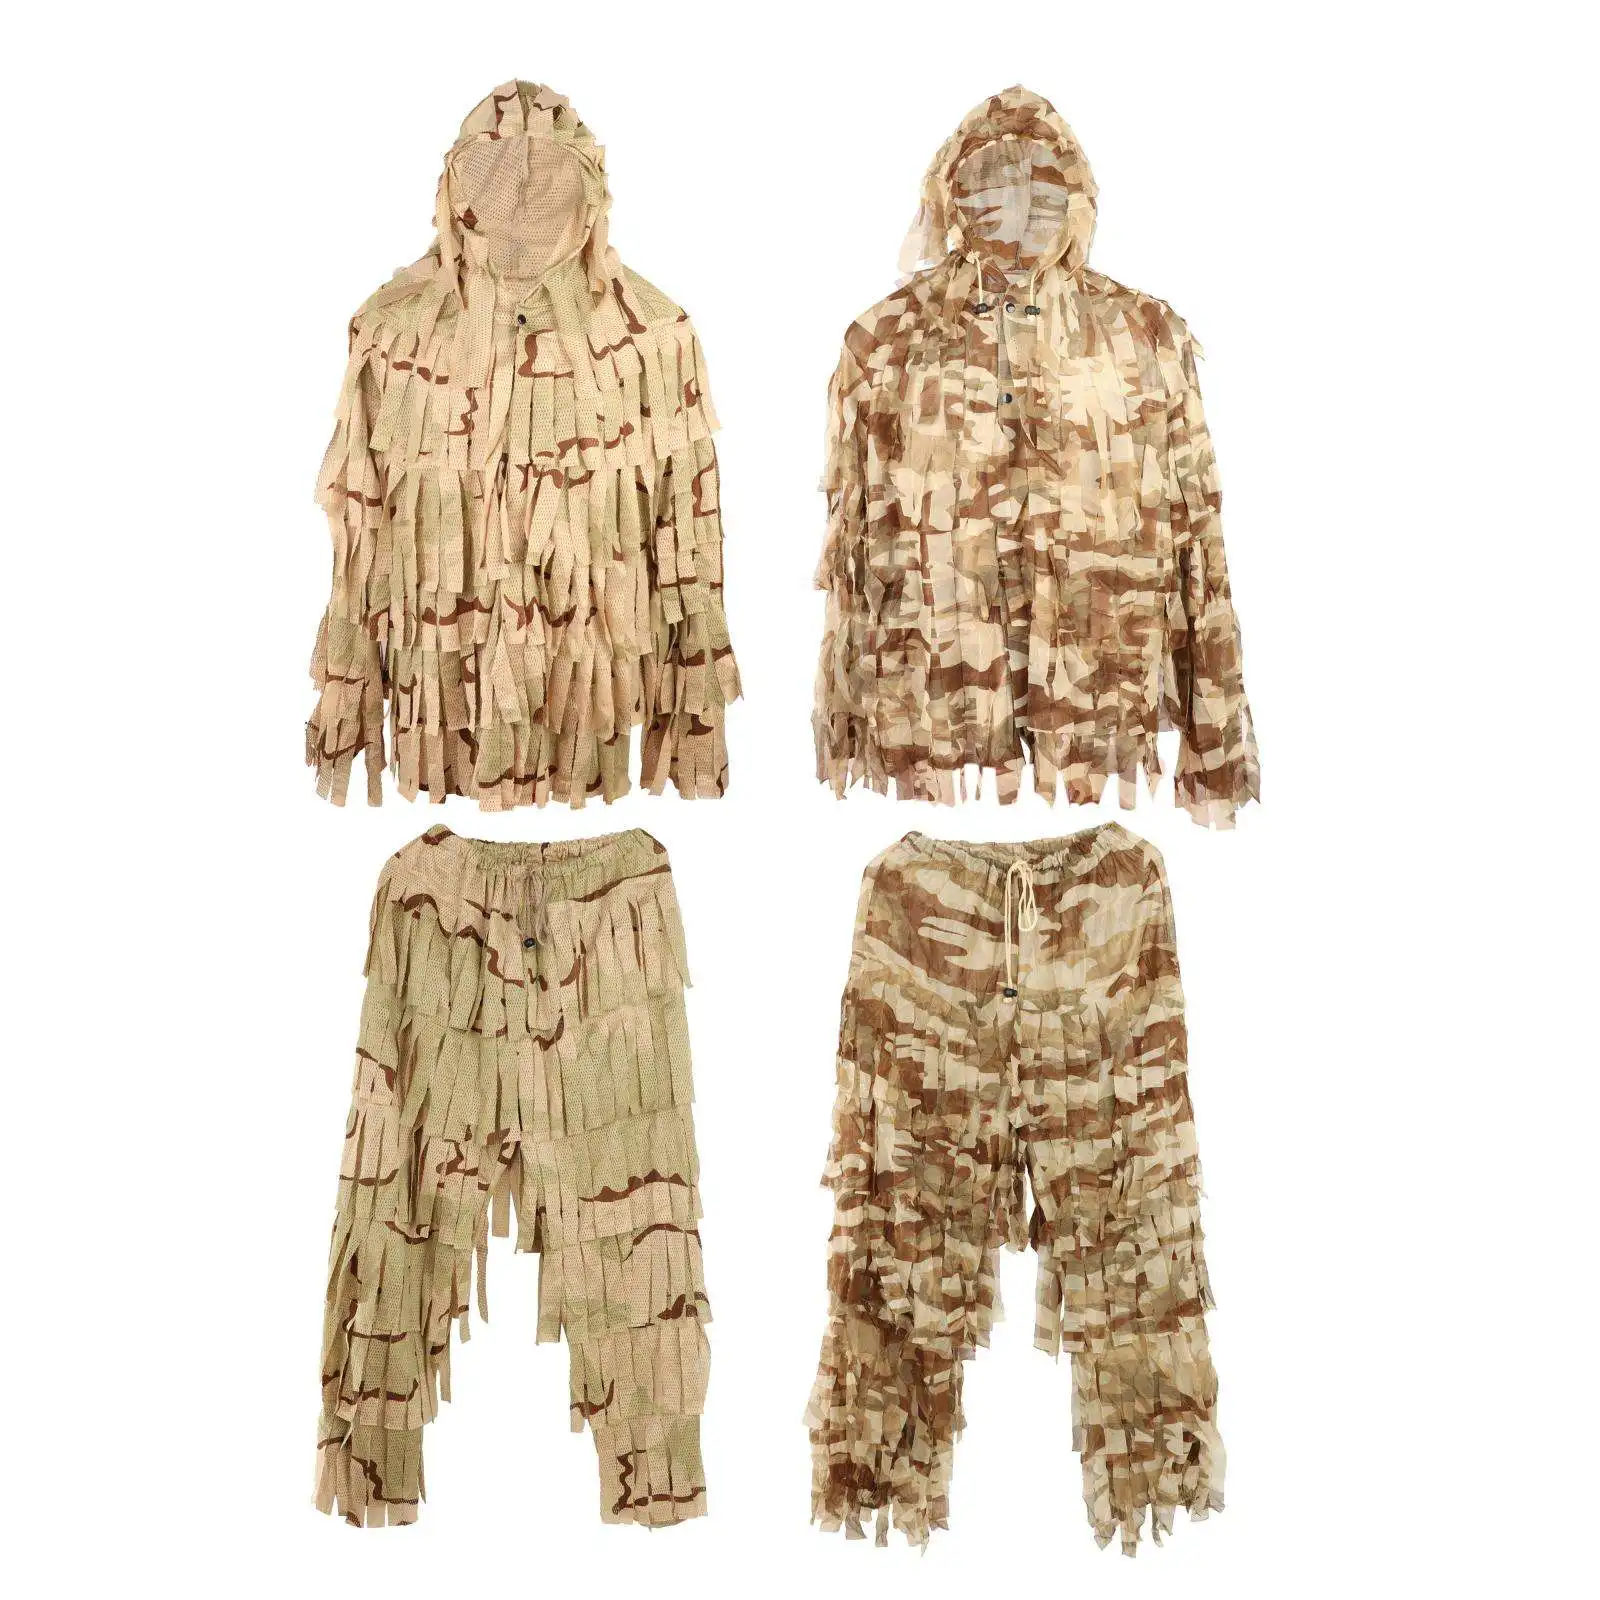 3D Camo Bionic Leaf Camouflage Jungle Hunting Ghillie Suit Set Woodland Sniper Birdwatching Ghillie Suit